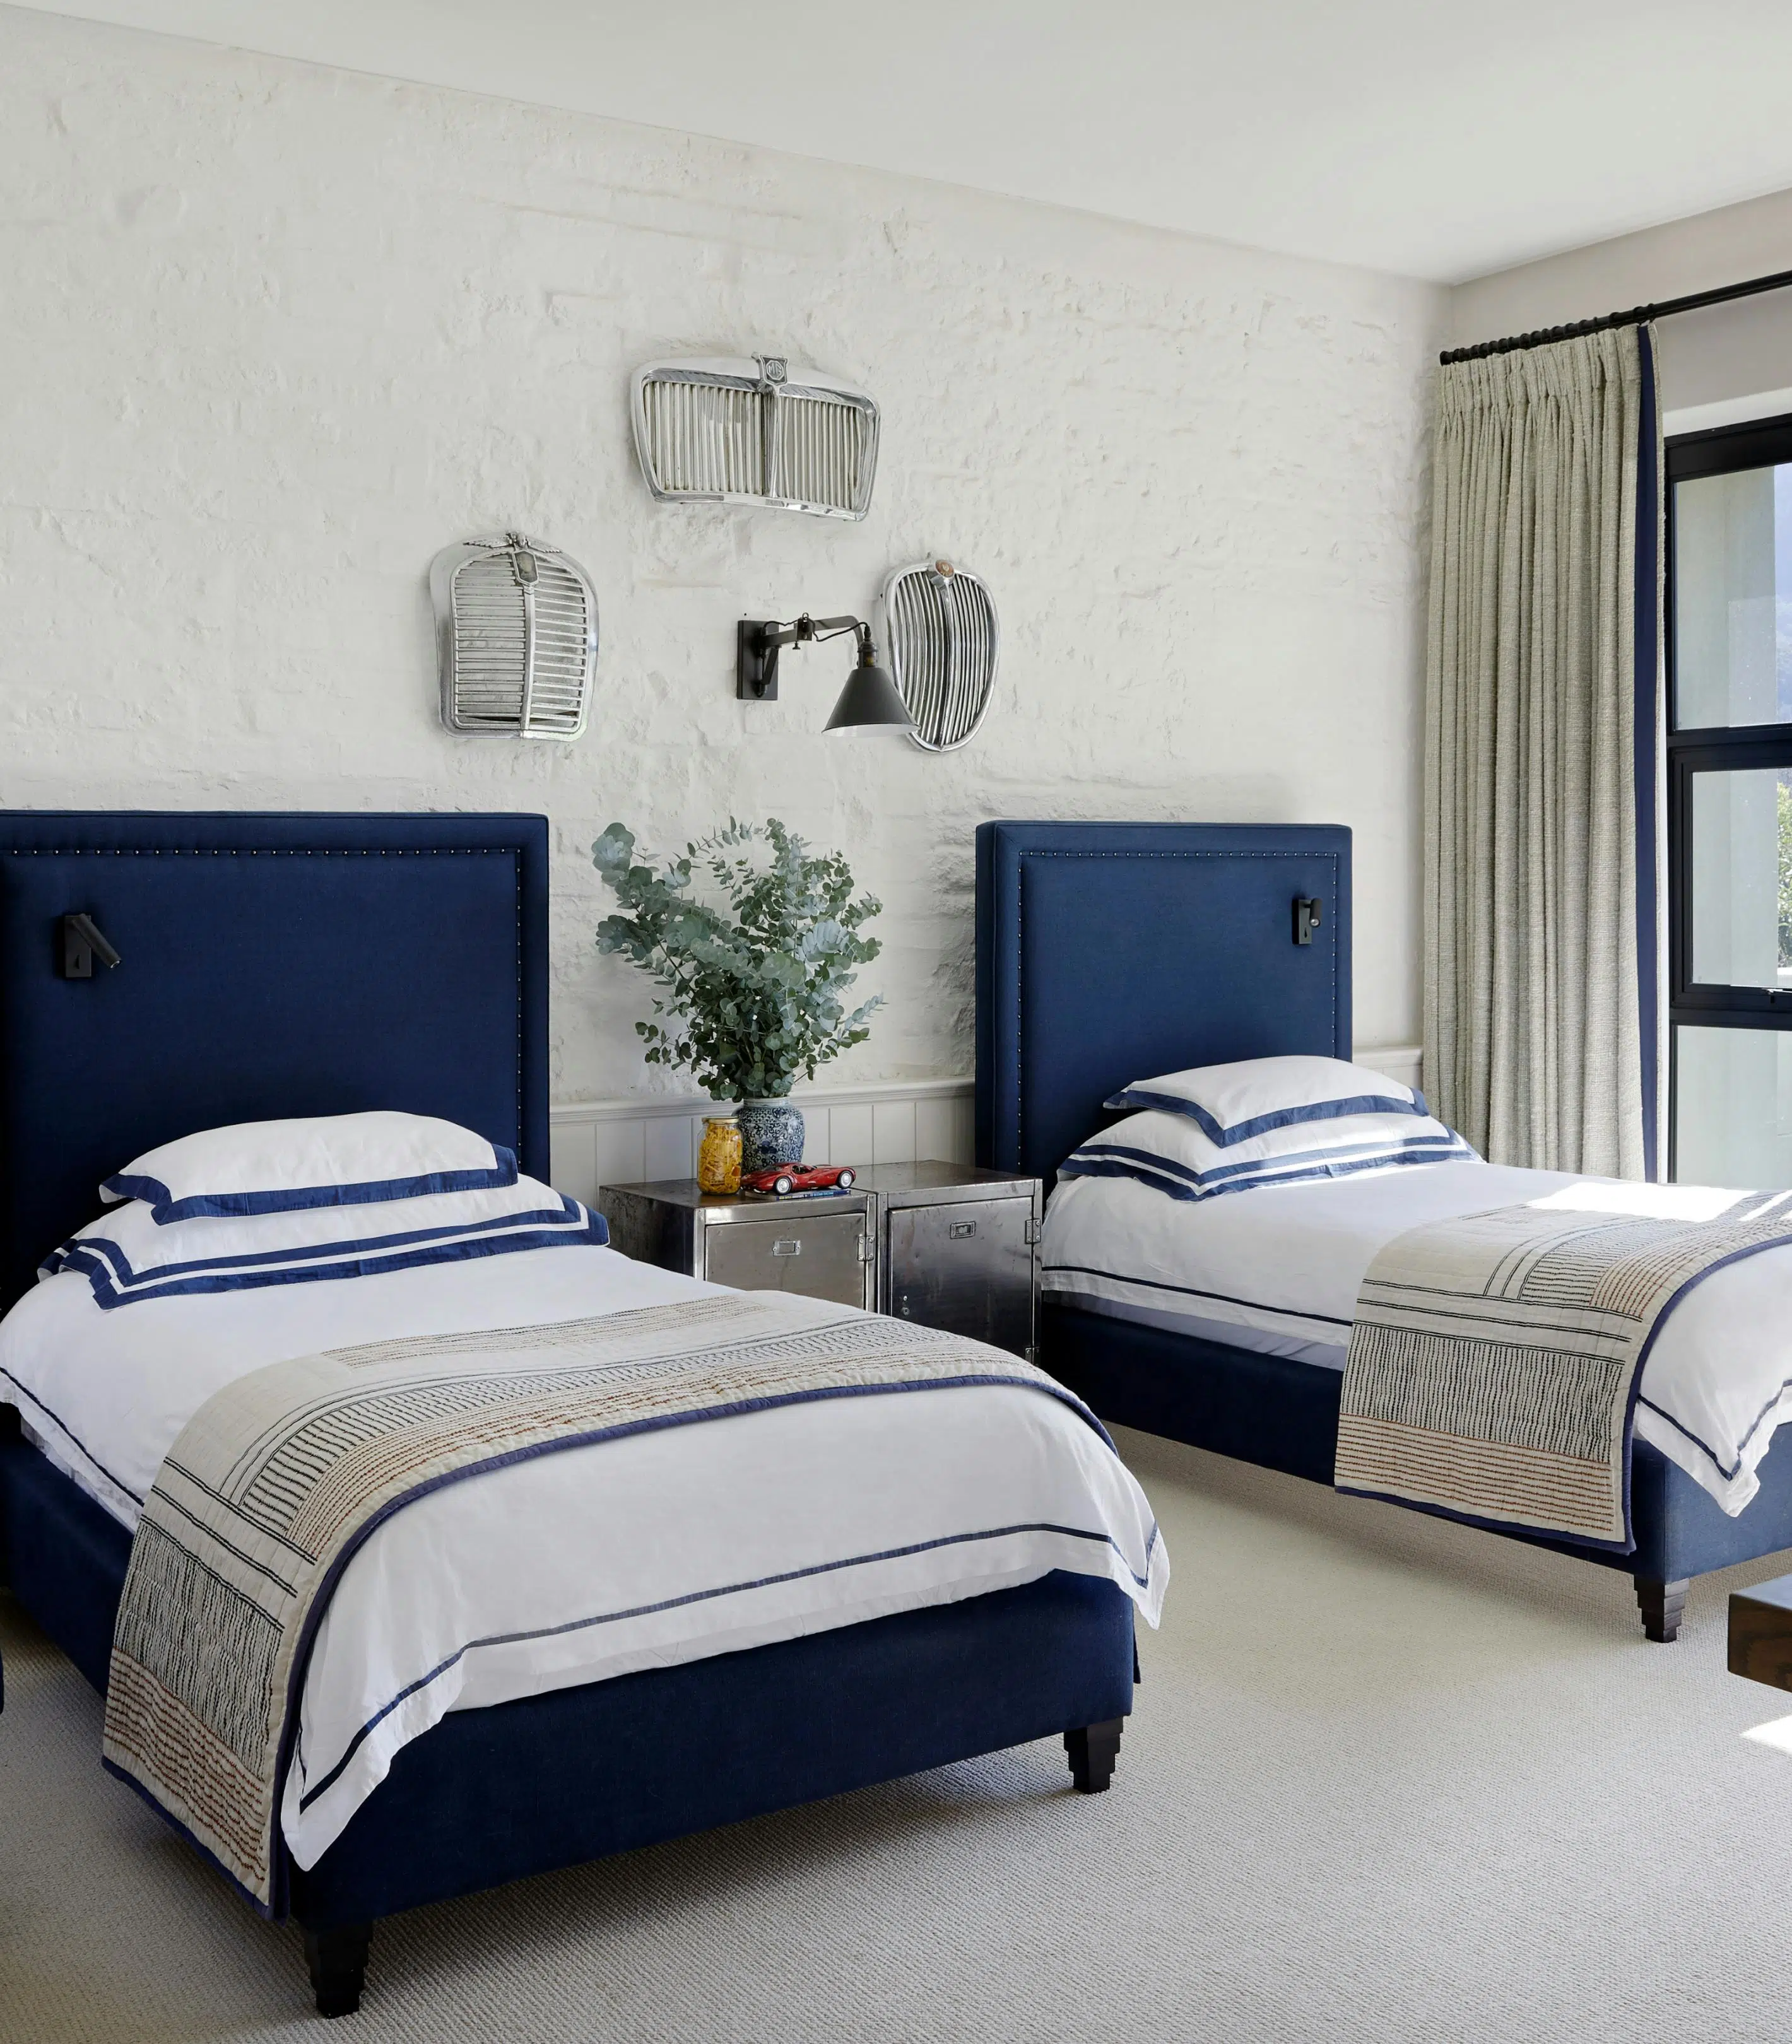 Two single beds in a dark blue tone are on either side of a mirrored bedside table.